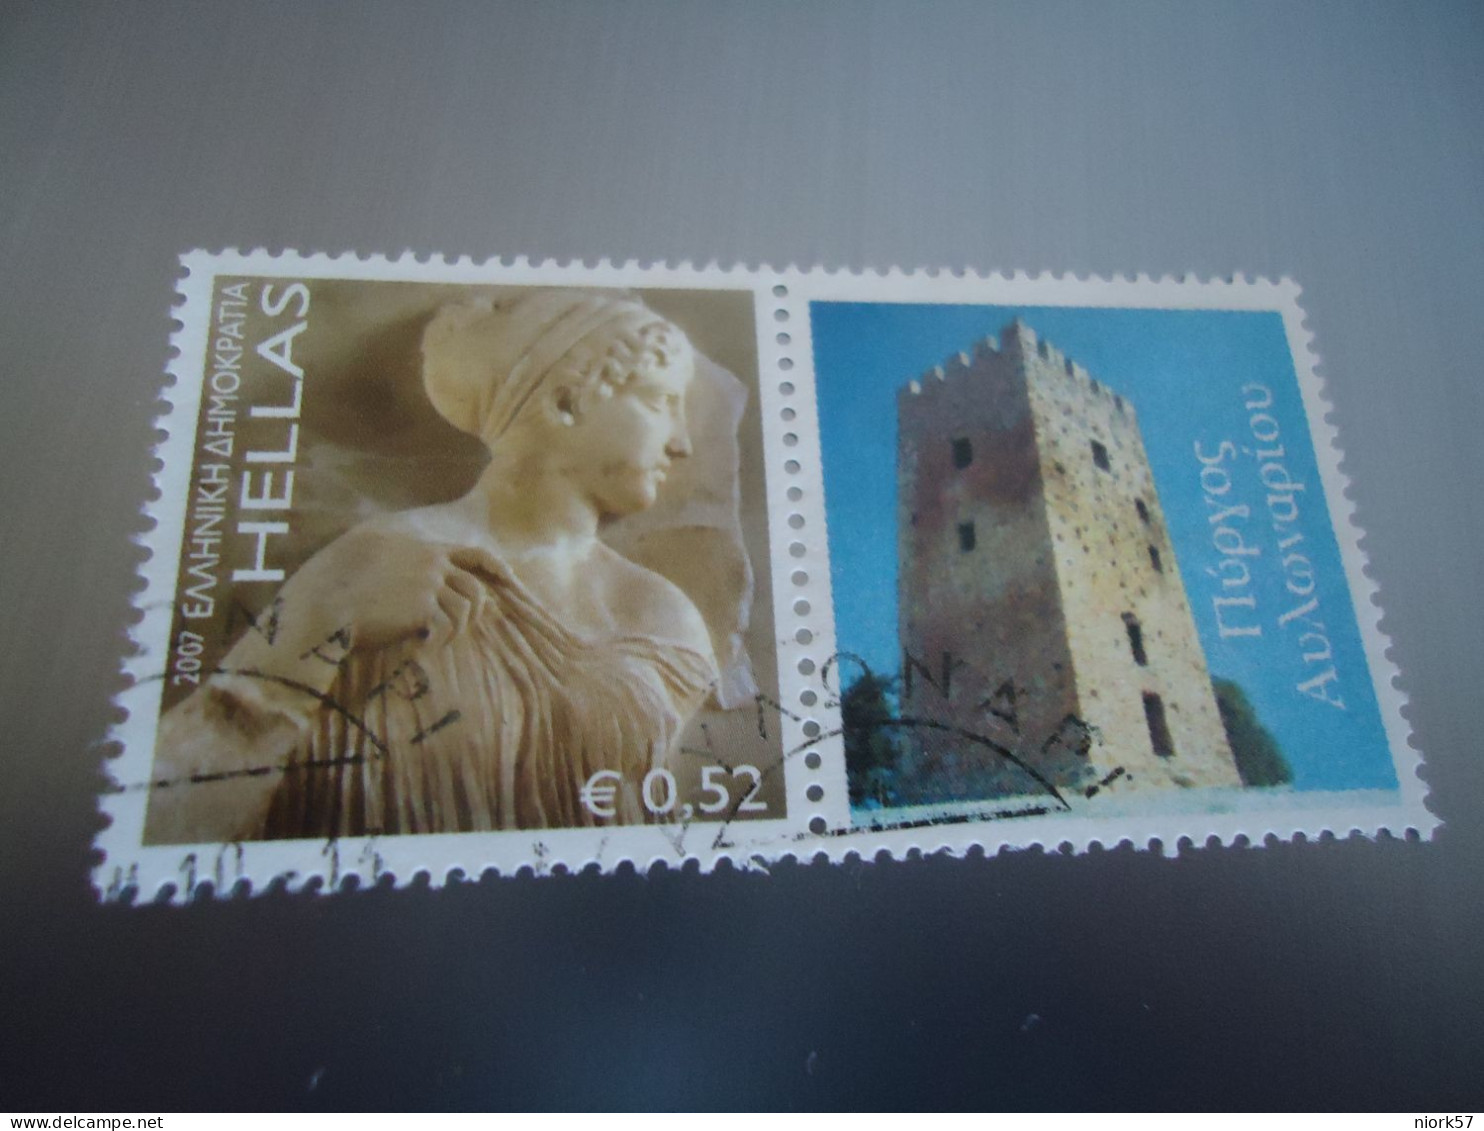 GREECE USED STAMPS  WITH LEBEL   POSTMARK  PYRGOS ΑΥΛΩΝΑΡΙΟΥ - Affrancature Meccaniche Rosse (EMA)